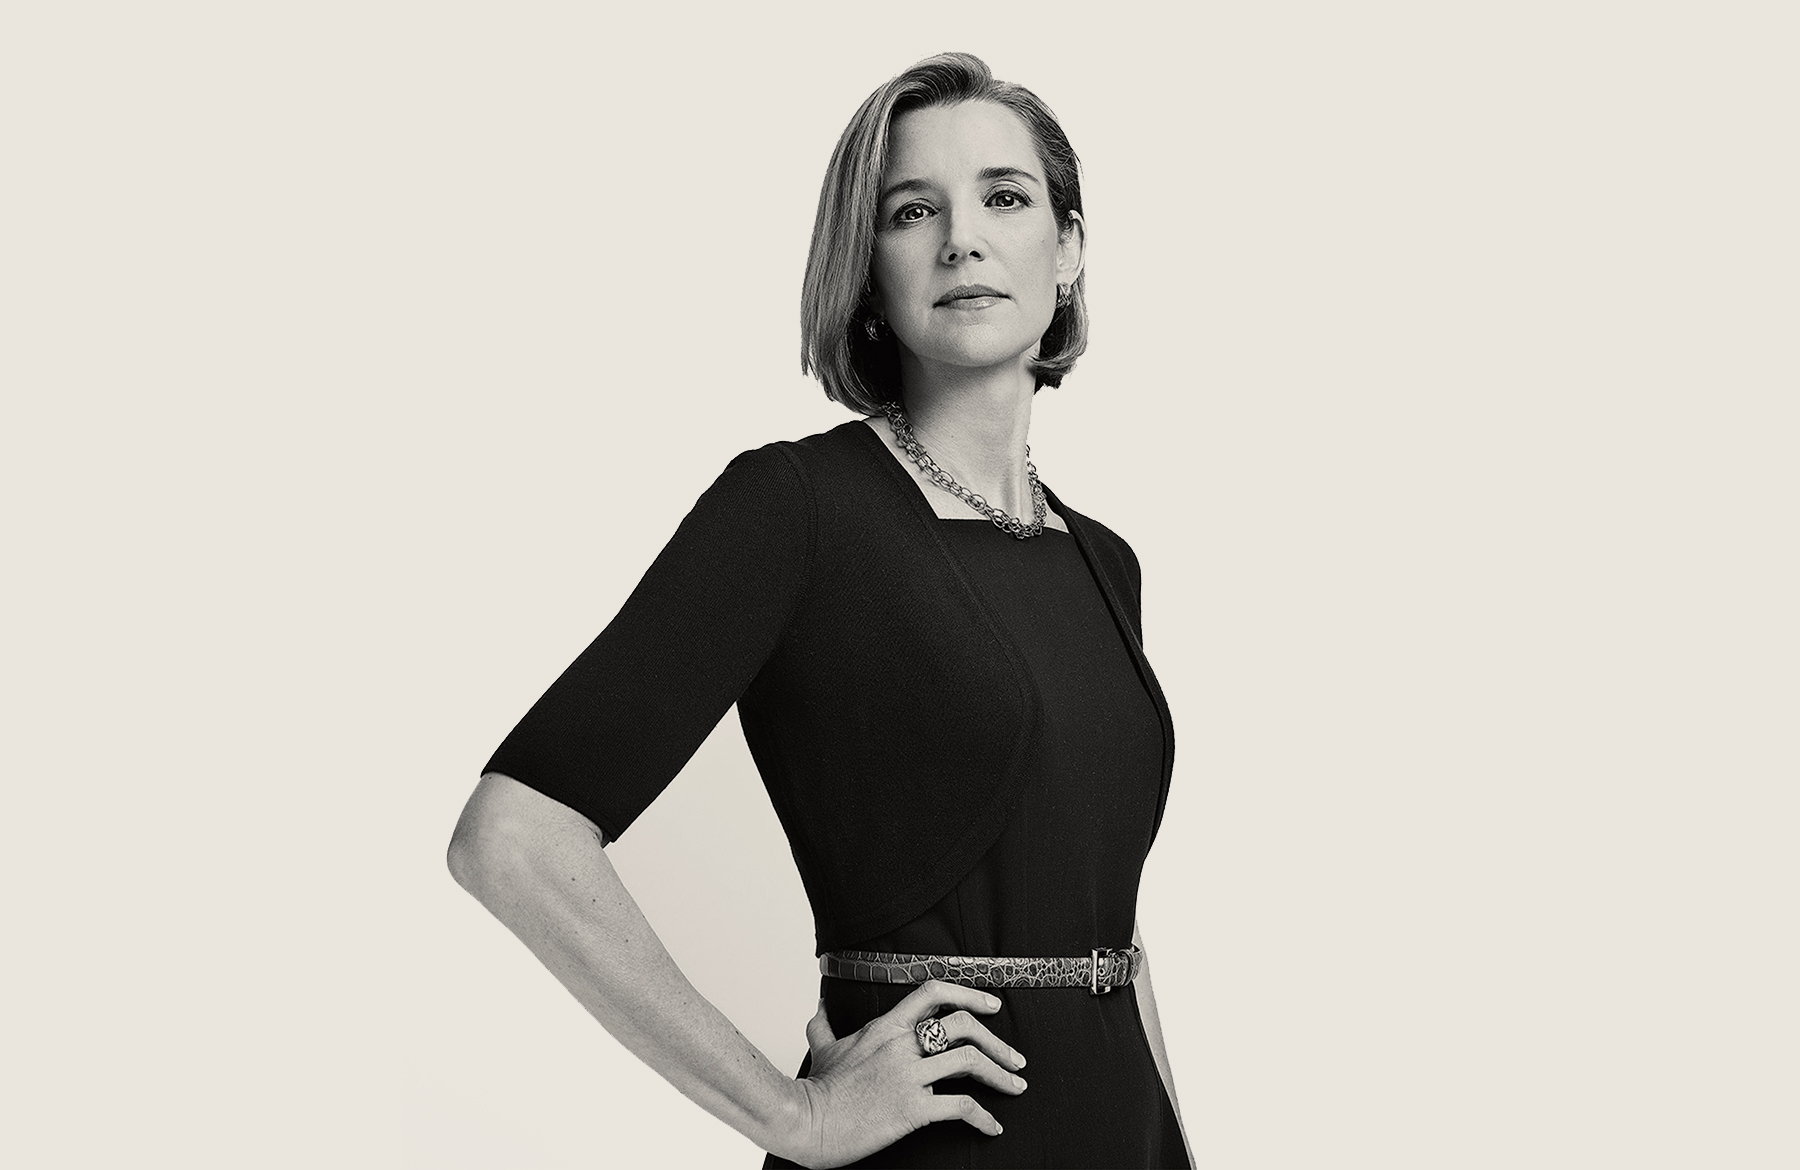 Sallie Krawcheck, the CEO and cofounder of the digital investment platform ...